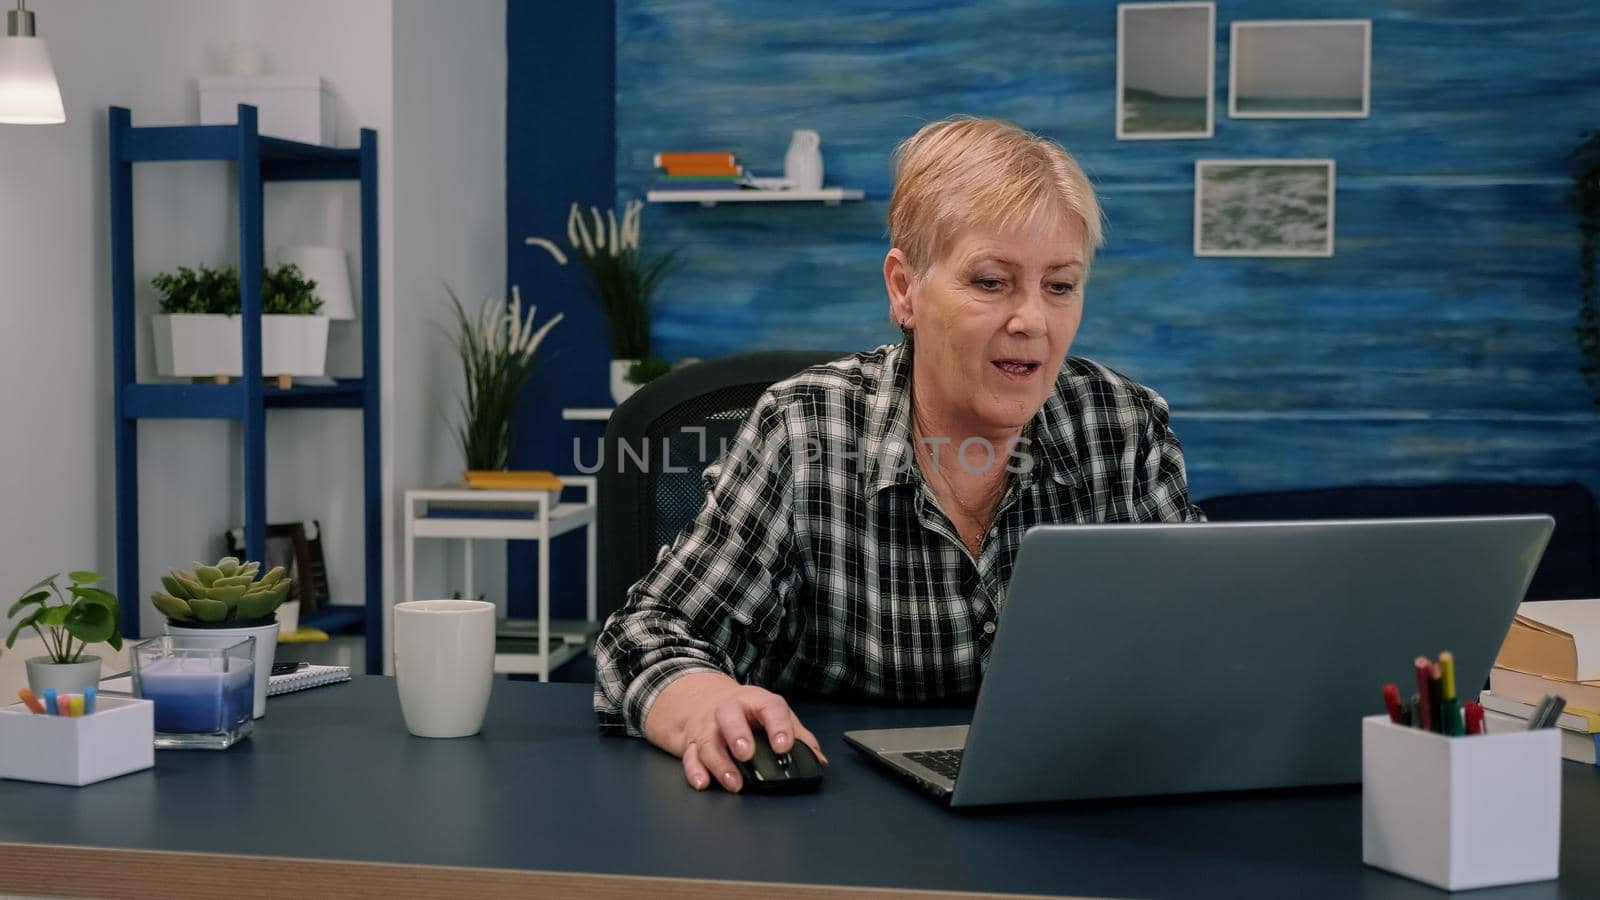 Old middle aged businesswoman working at laptop typing financial data sitting at desk using modern technology while retired husband sitting on couch. Serious lady analyzing and managing domestic bills